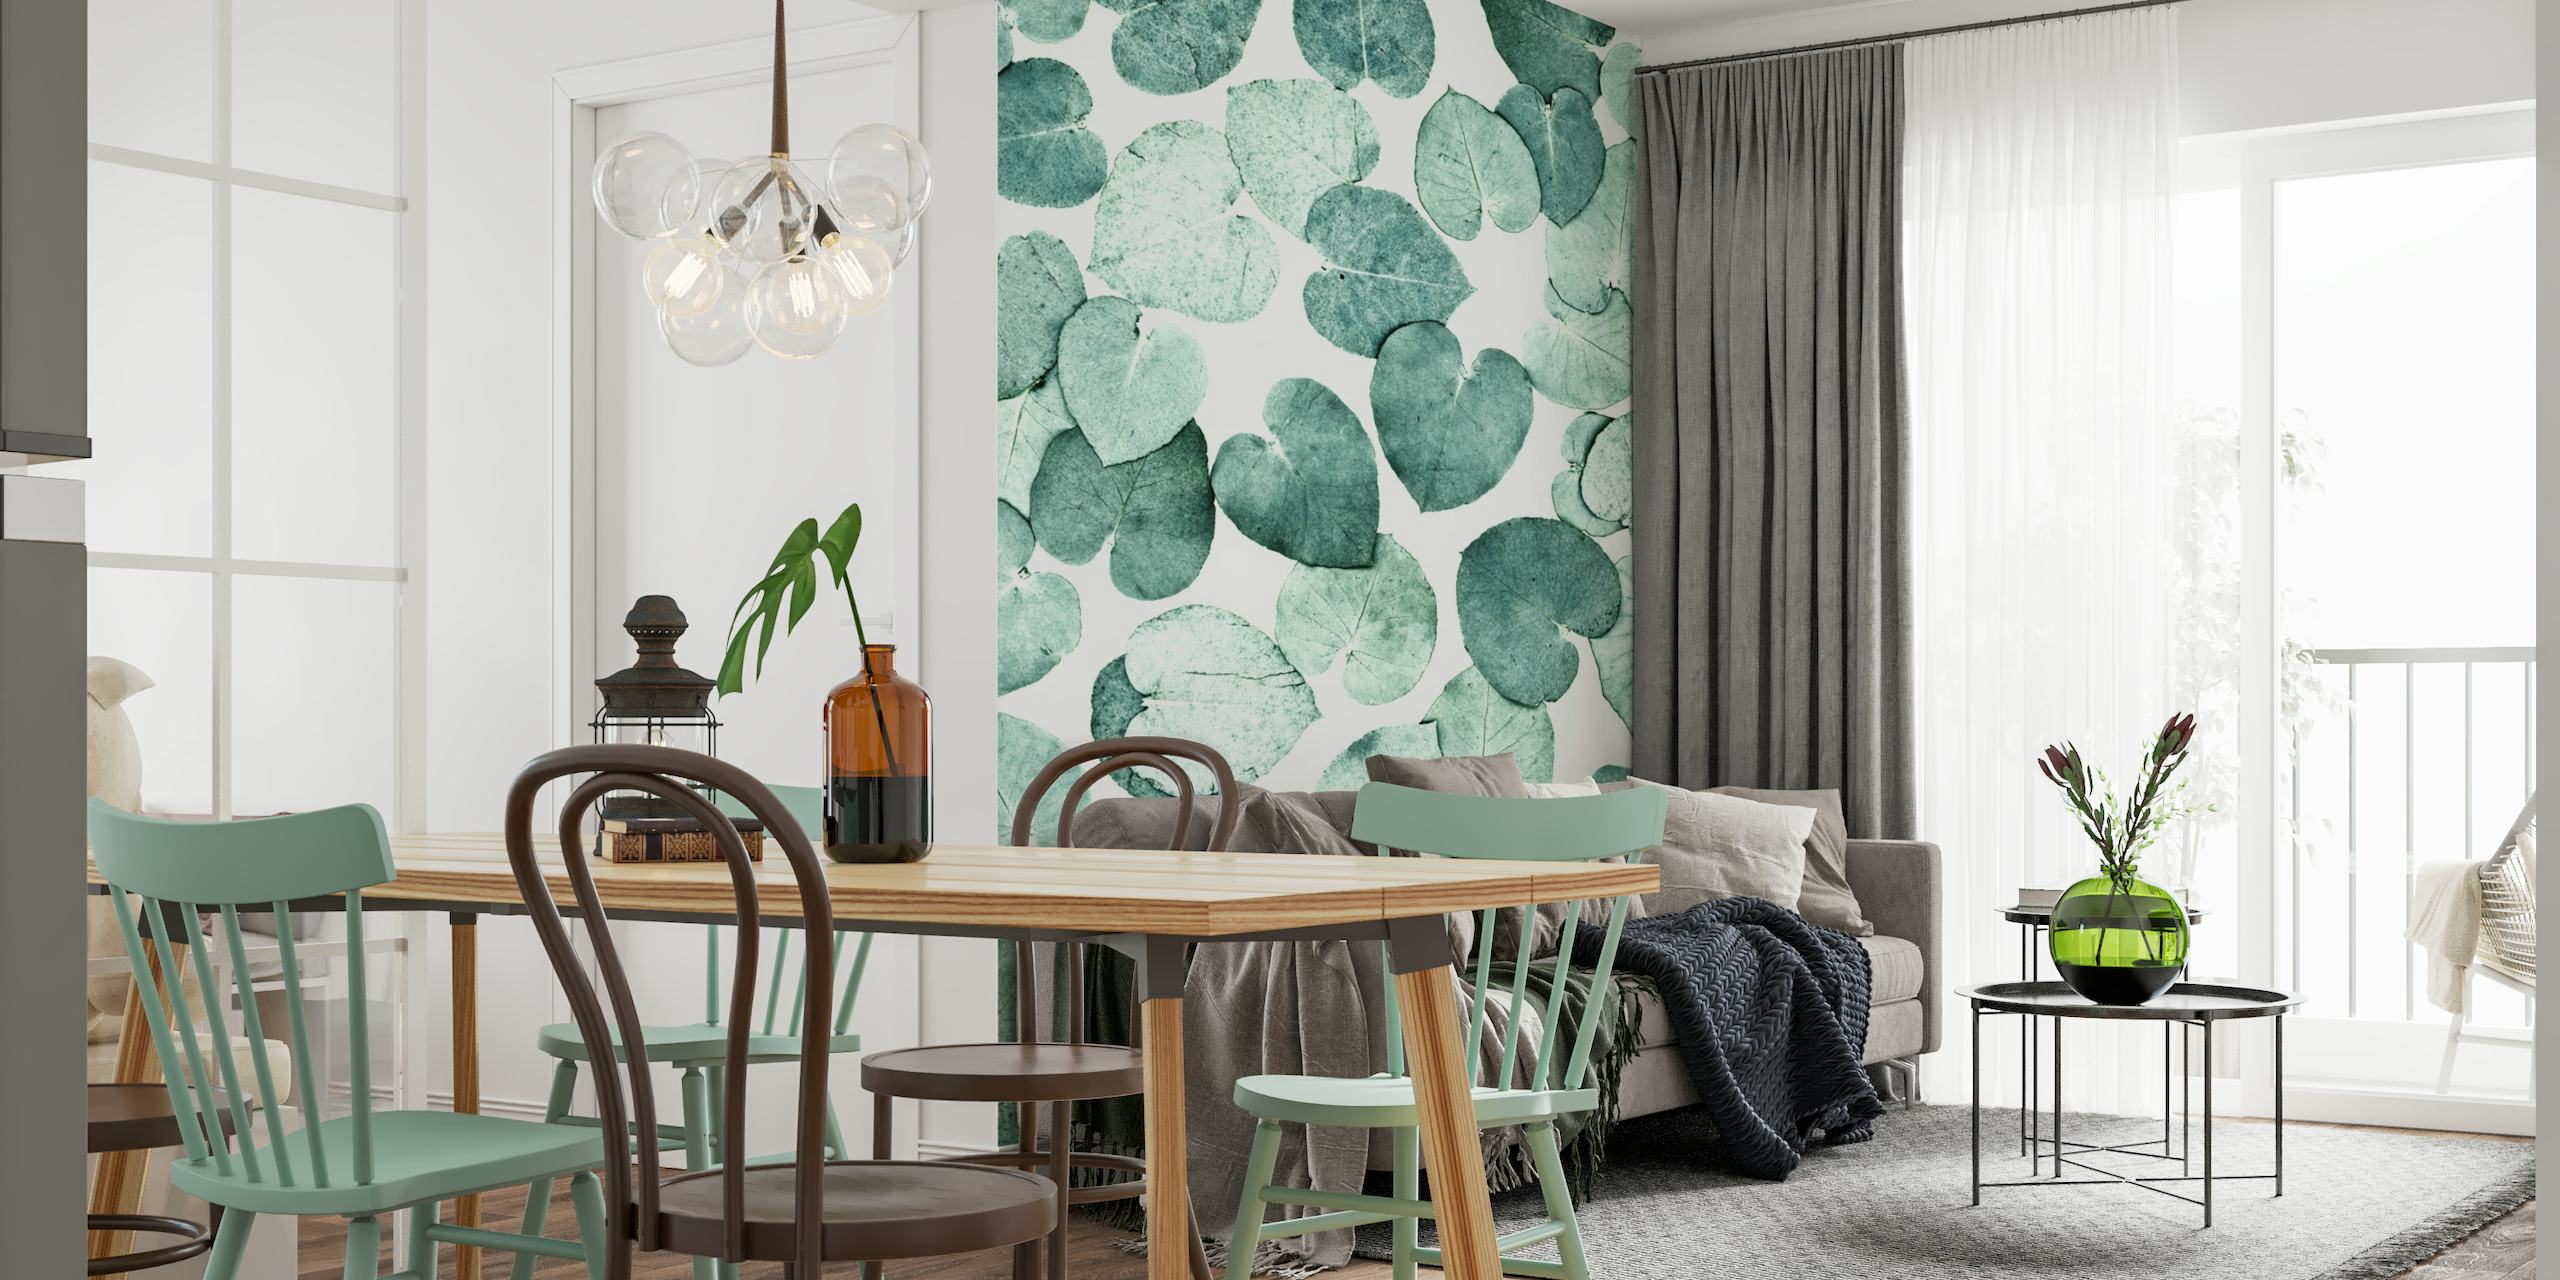 Green leaf pattern wall mural for tranquil interior design